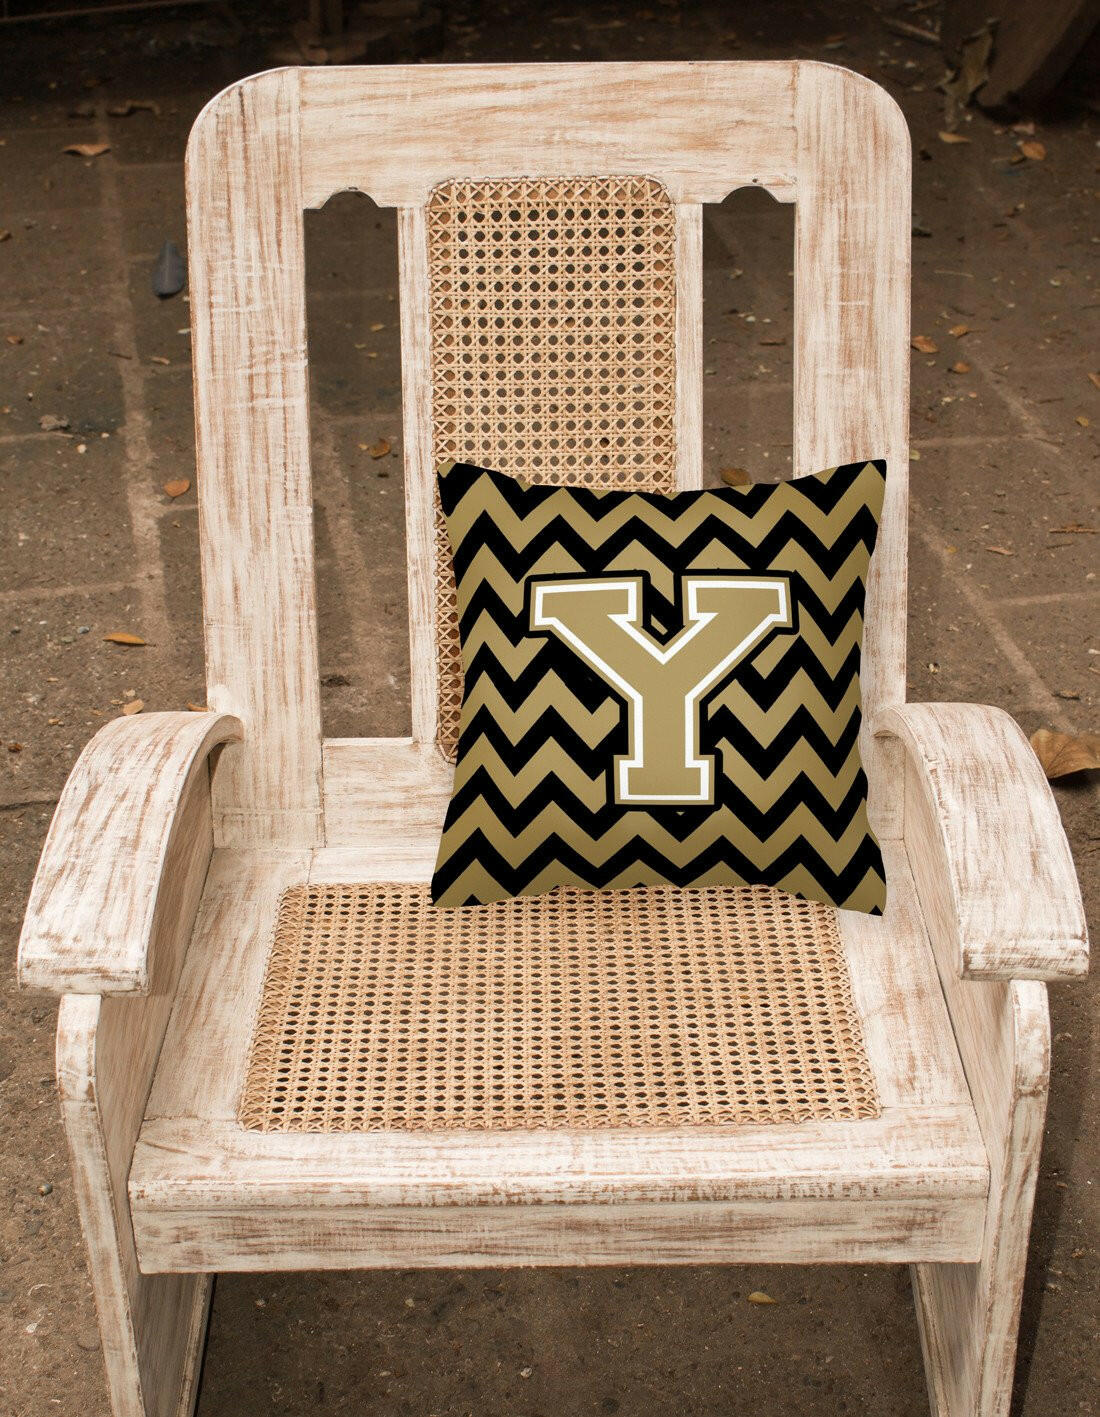 Letter Y Chevron Black and Gold  Fabric Decorative Pillow CJ1050-YPW1414 by Caroline's Treasures